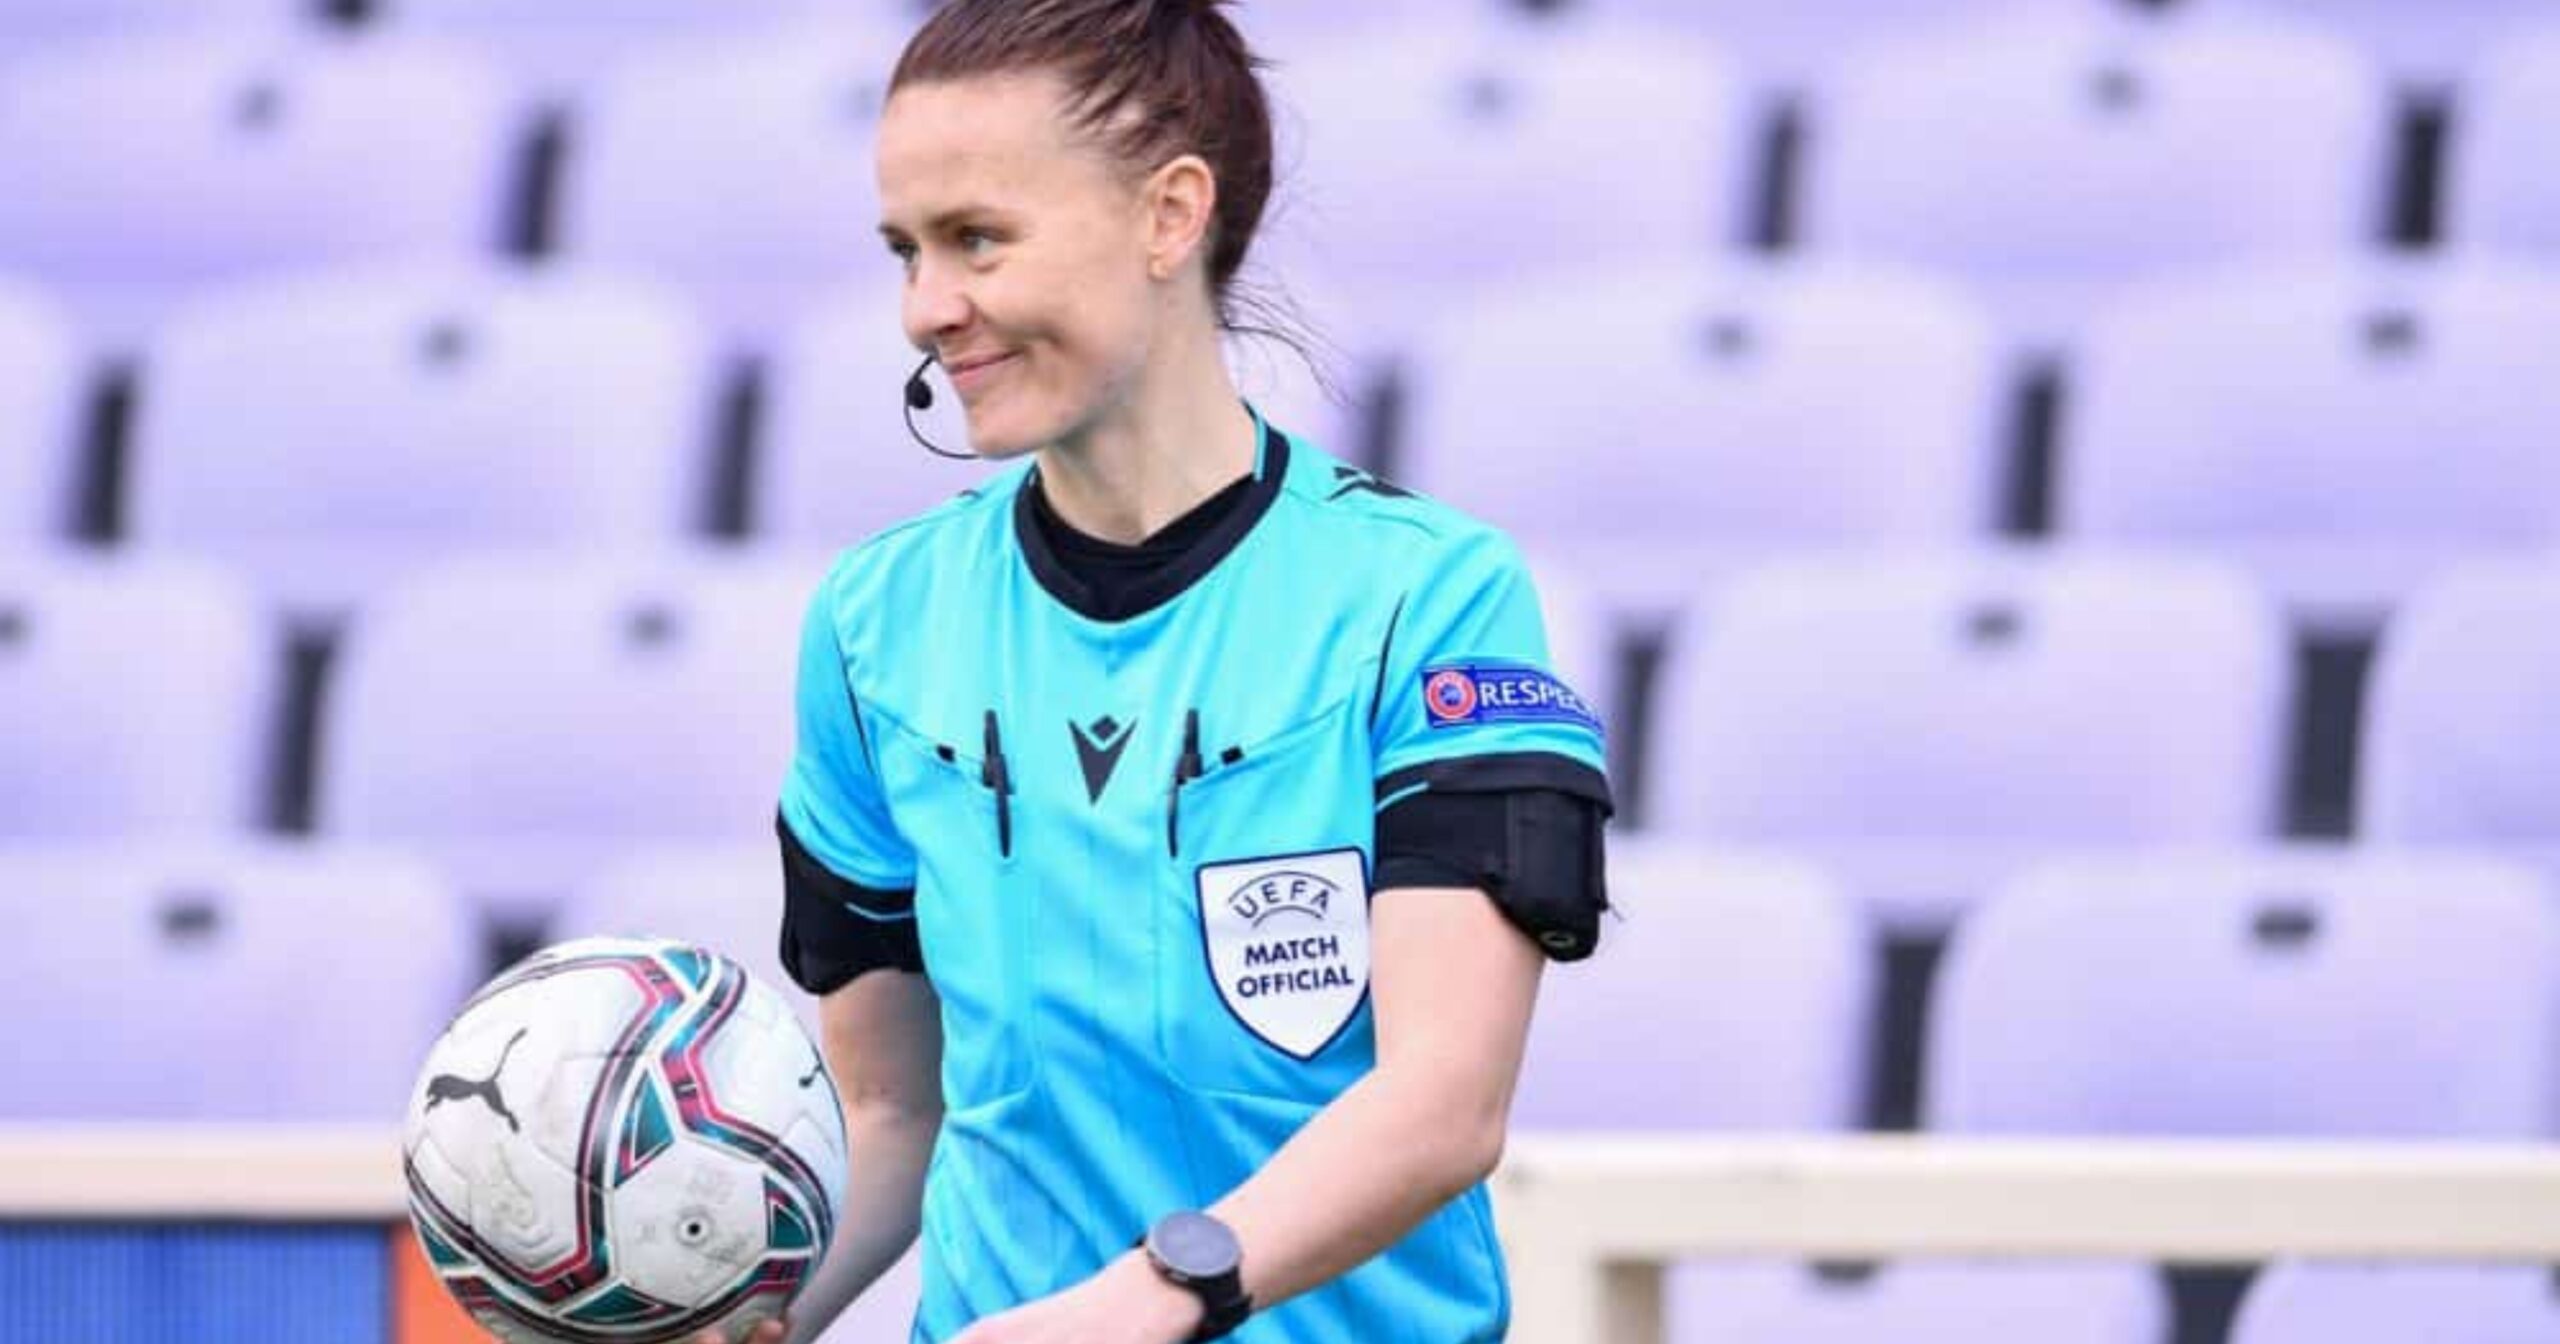 Historic Moment Rebecca Welch Becomes First Woman Referee in English Premier League